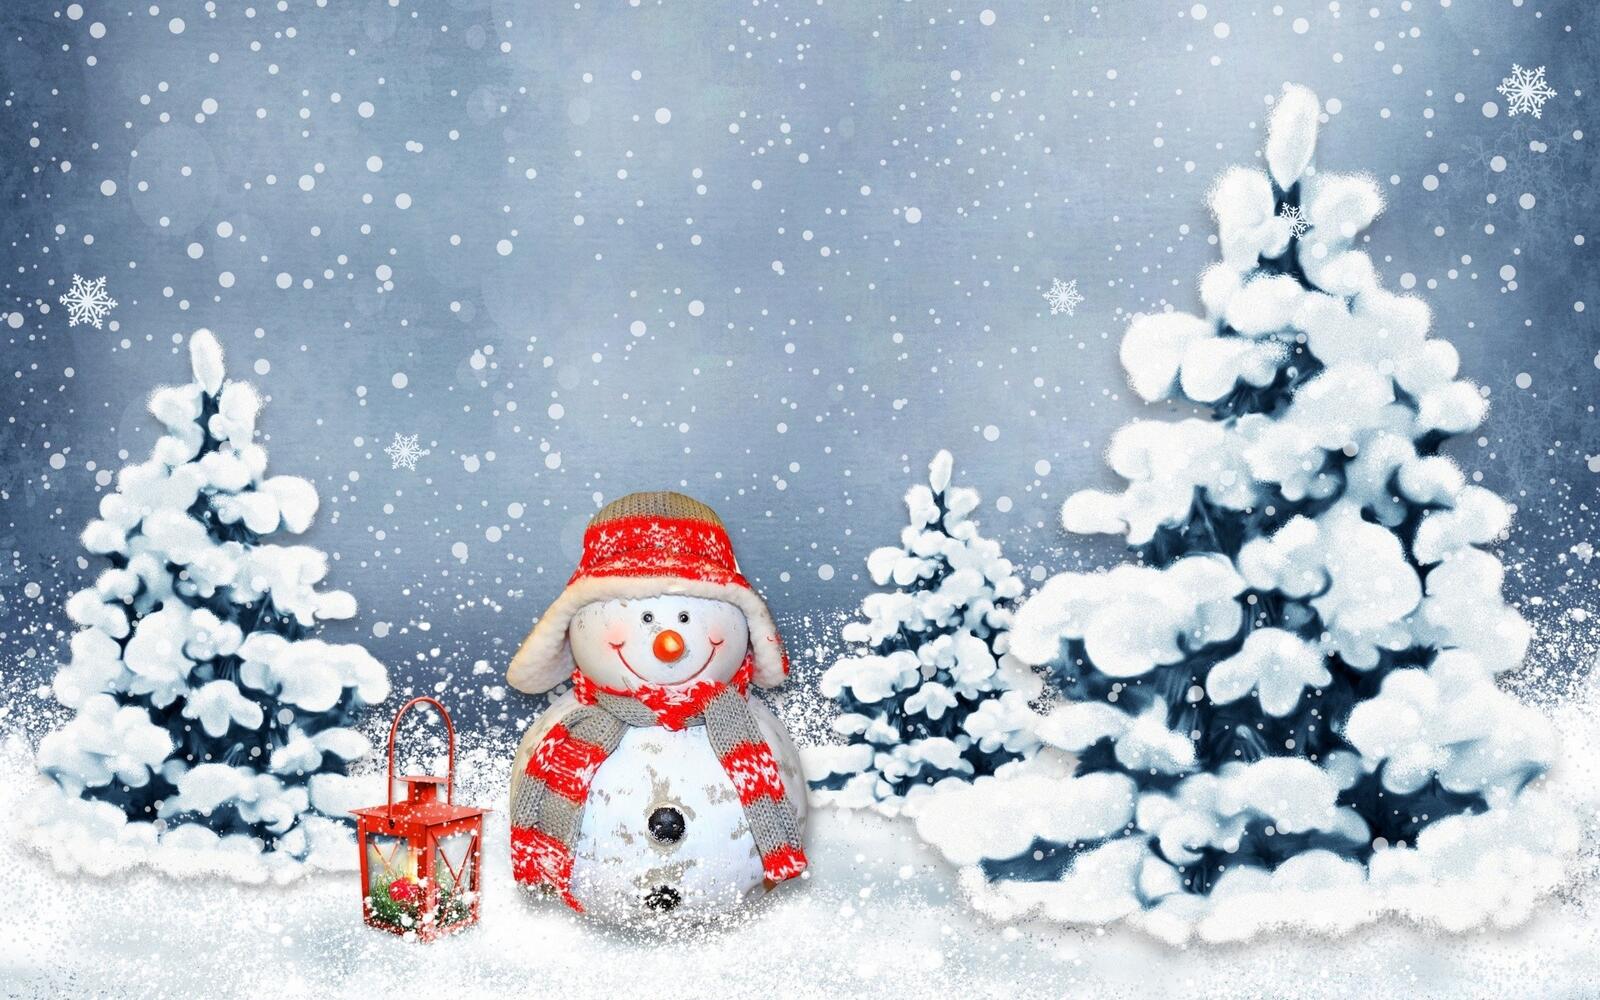 Wallpapers snowman winter christmas trees on the desktop